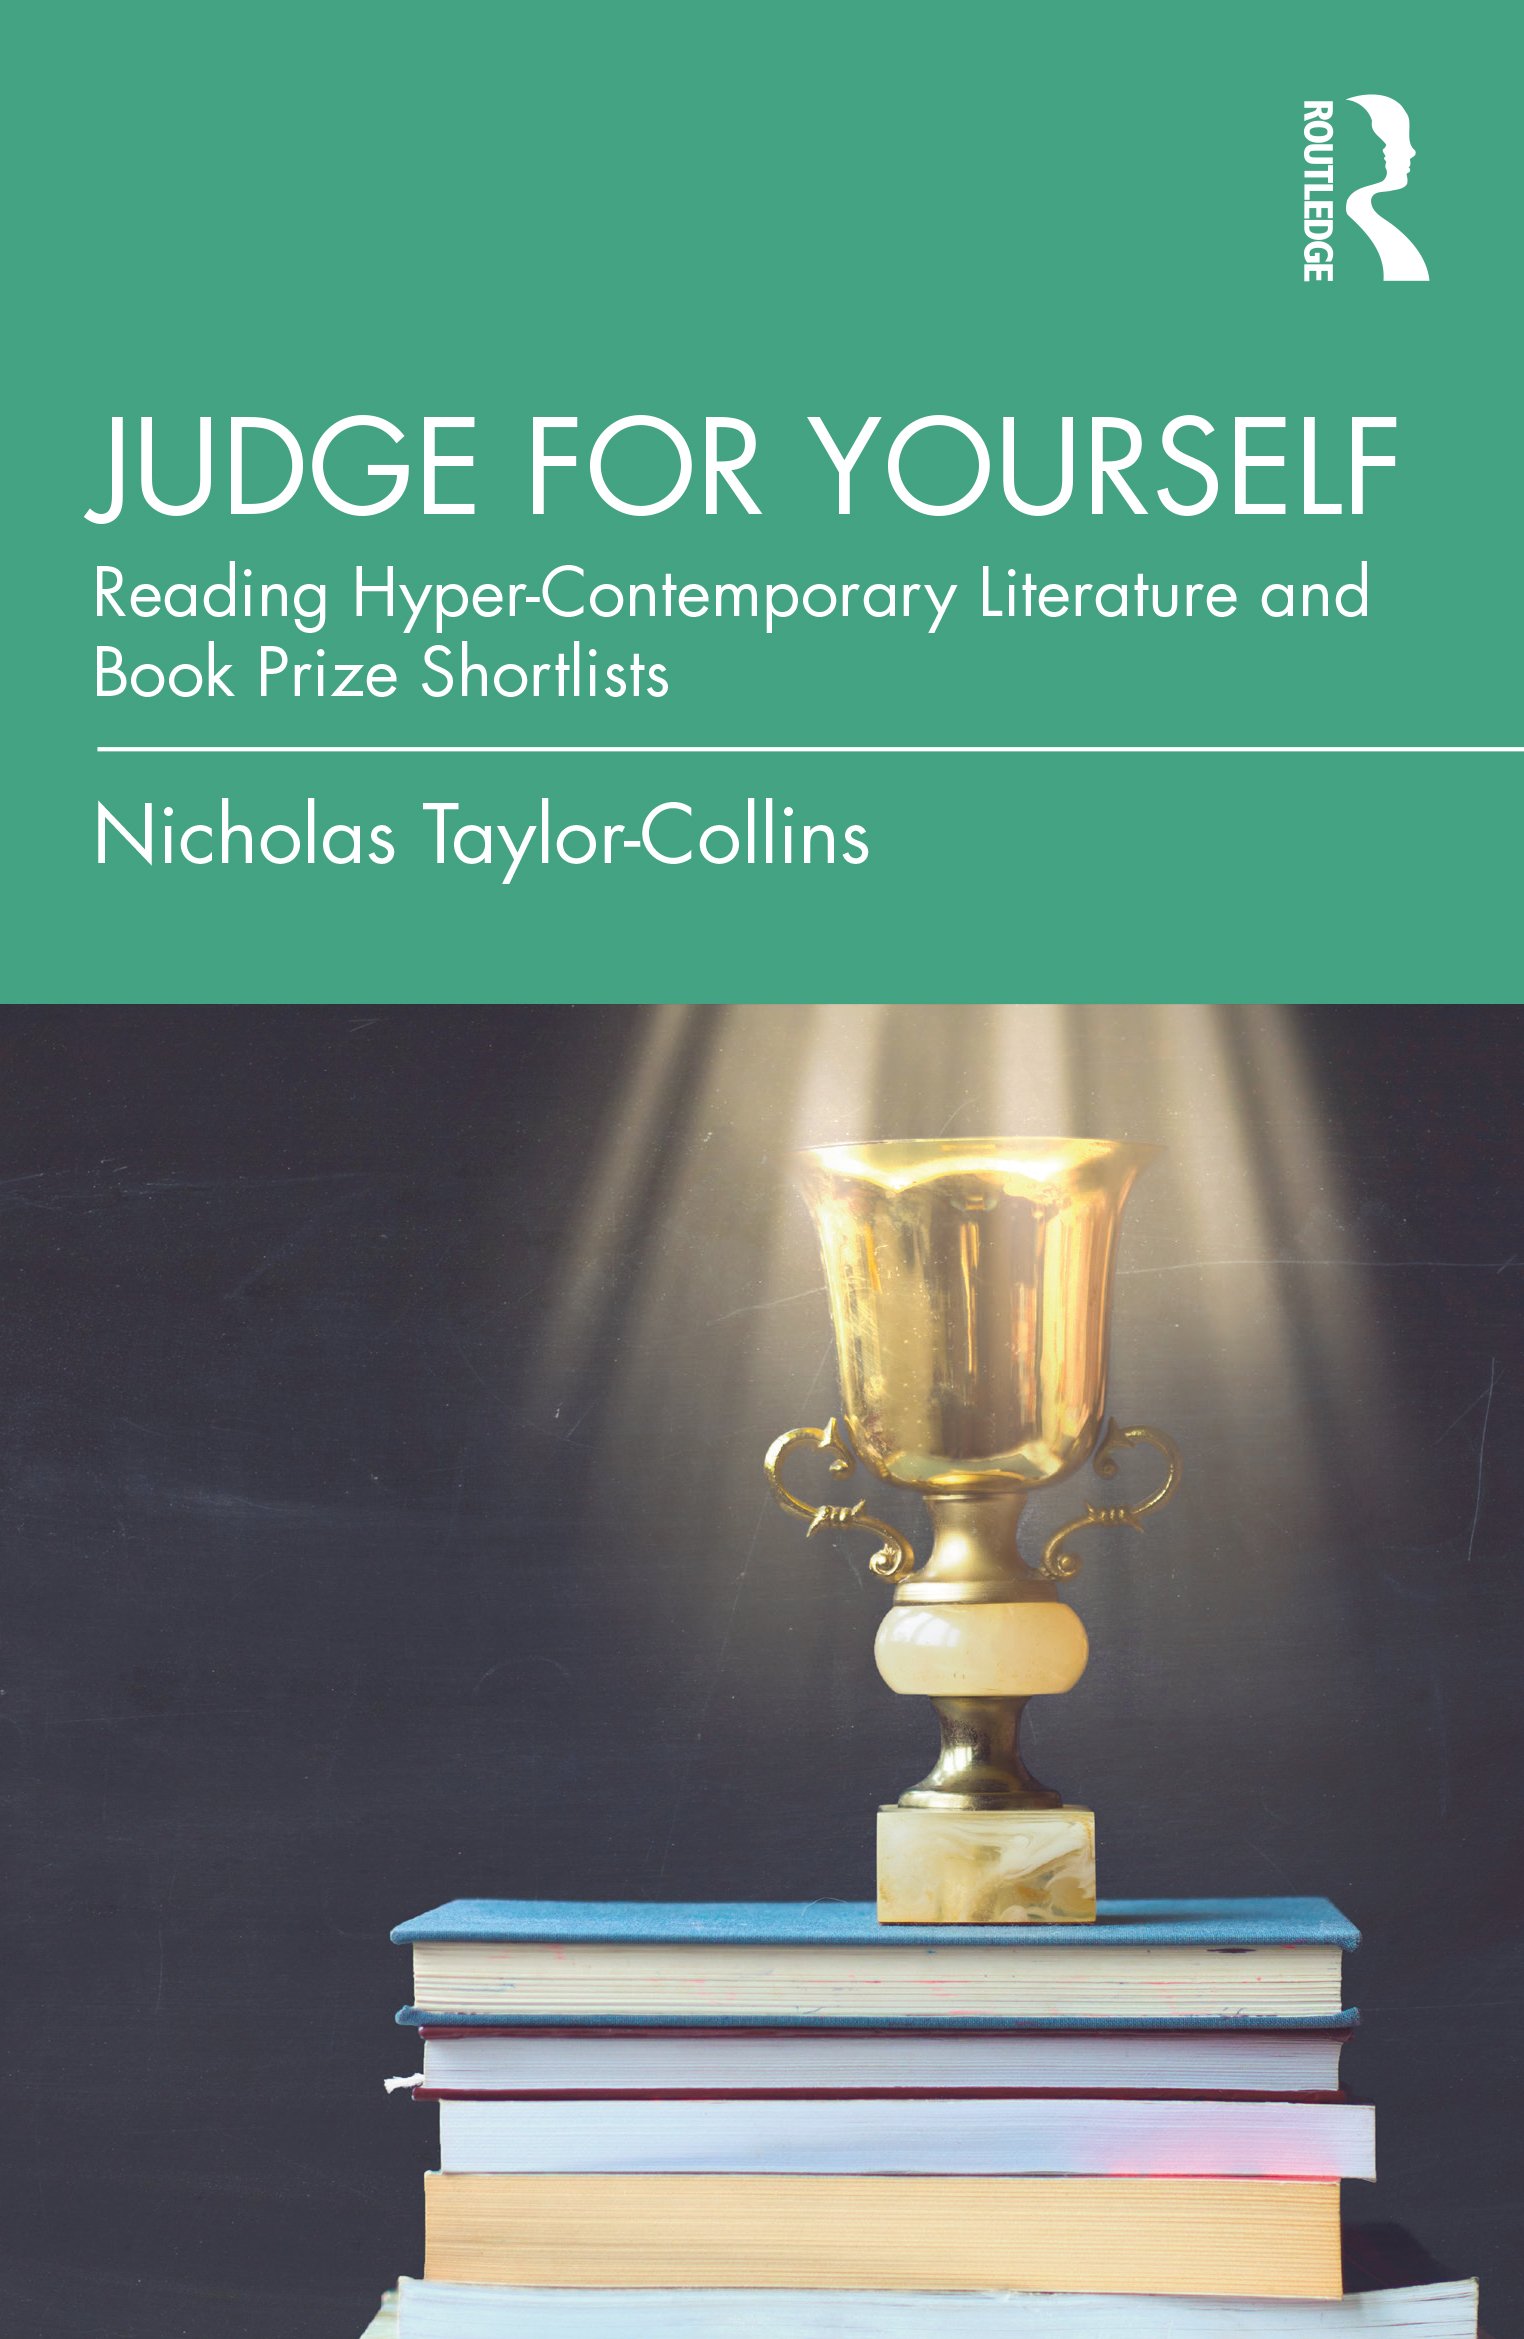 Book cover of 'Judge for Yourself' by Nicholas Taylor-Collins